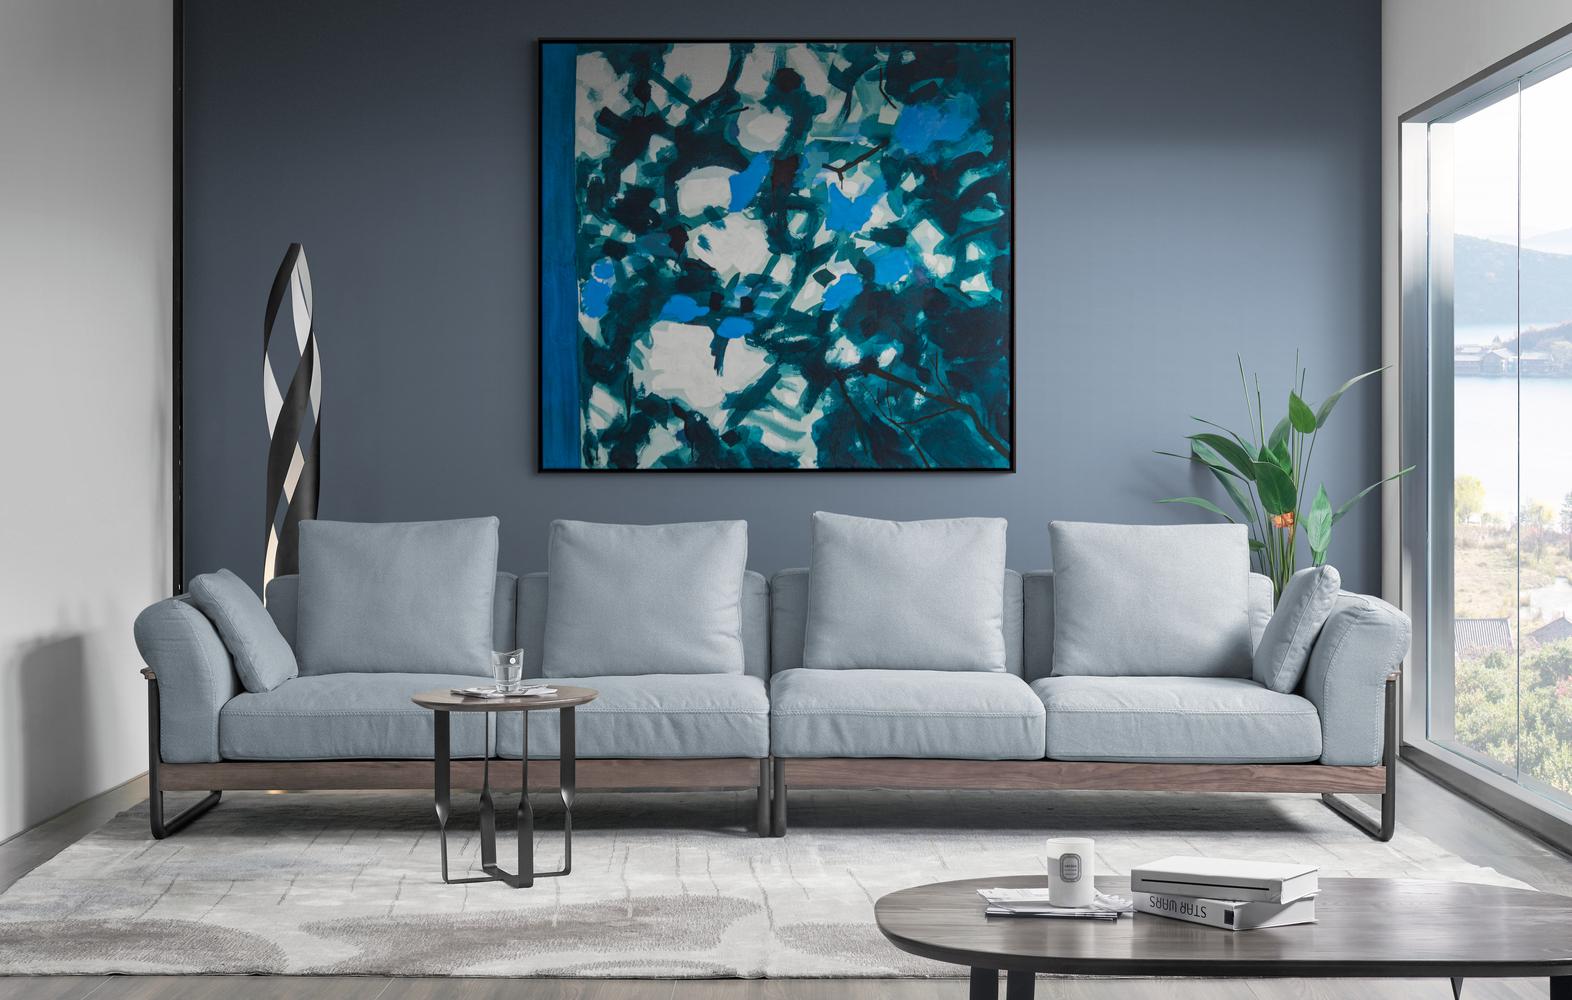 Piano Reflections 2 - dark, cool, expressive, abstracted, acrylic on canvas For Sale 3